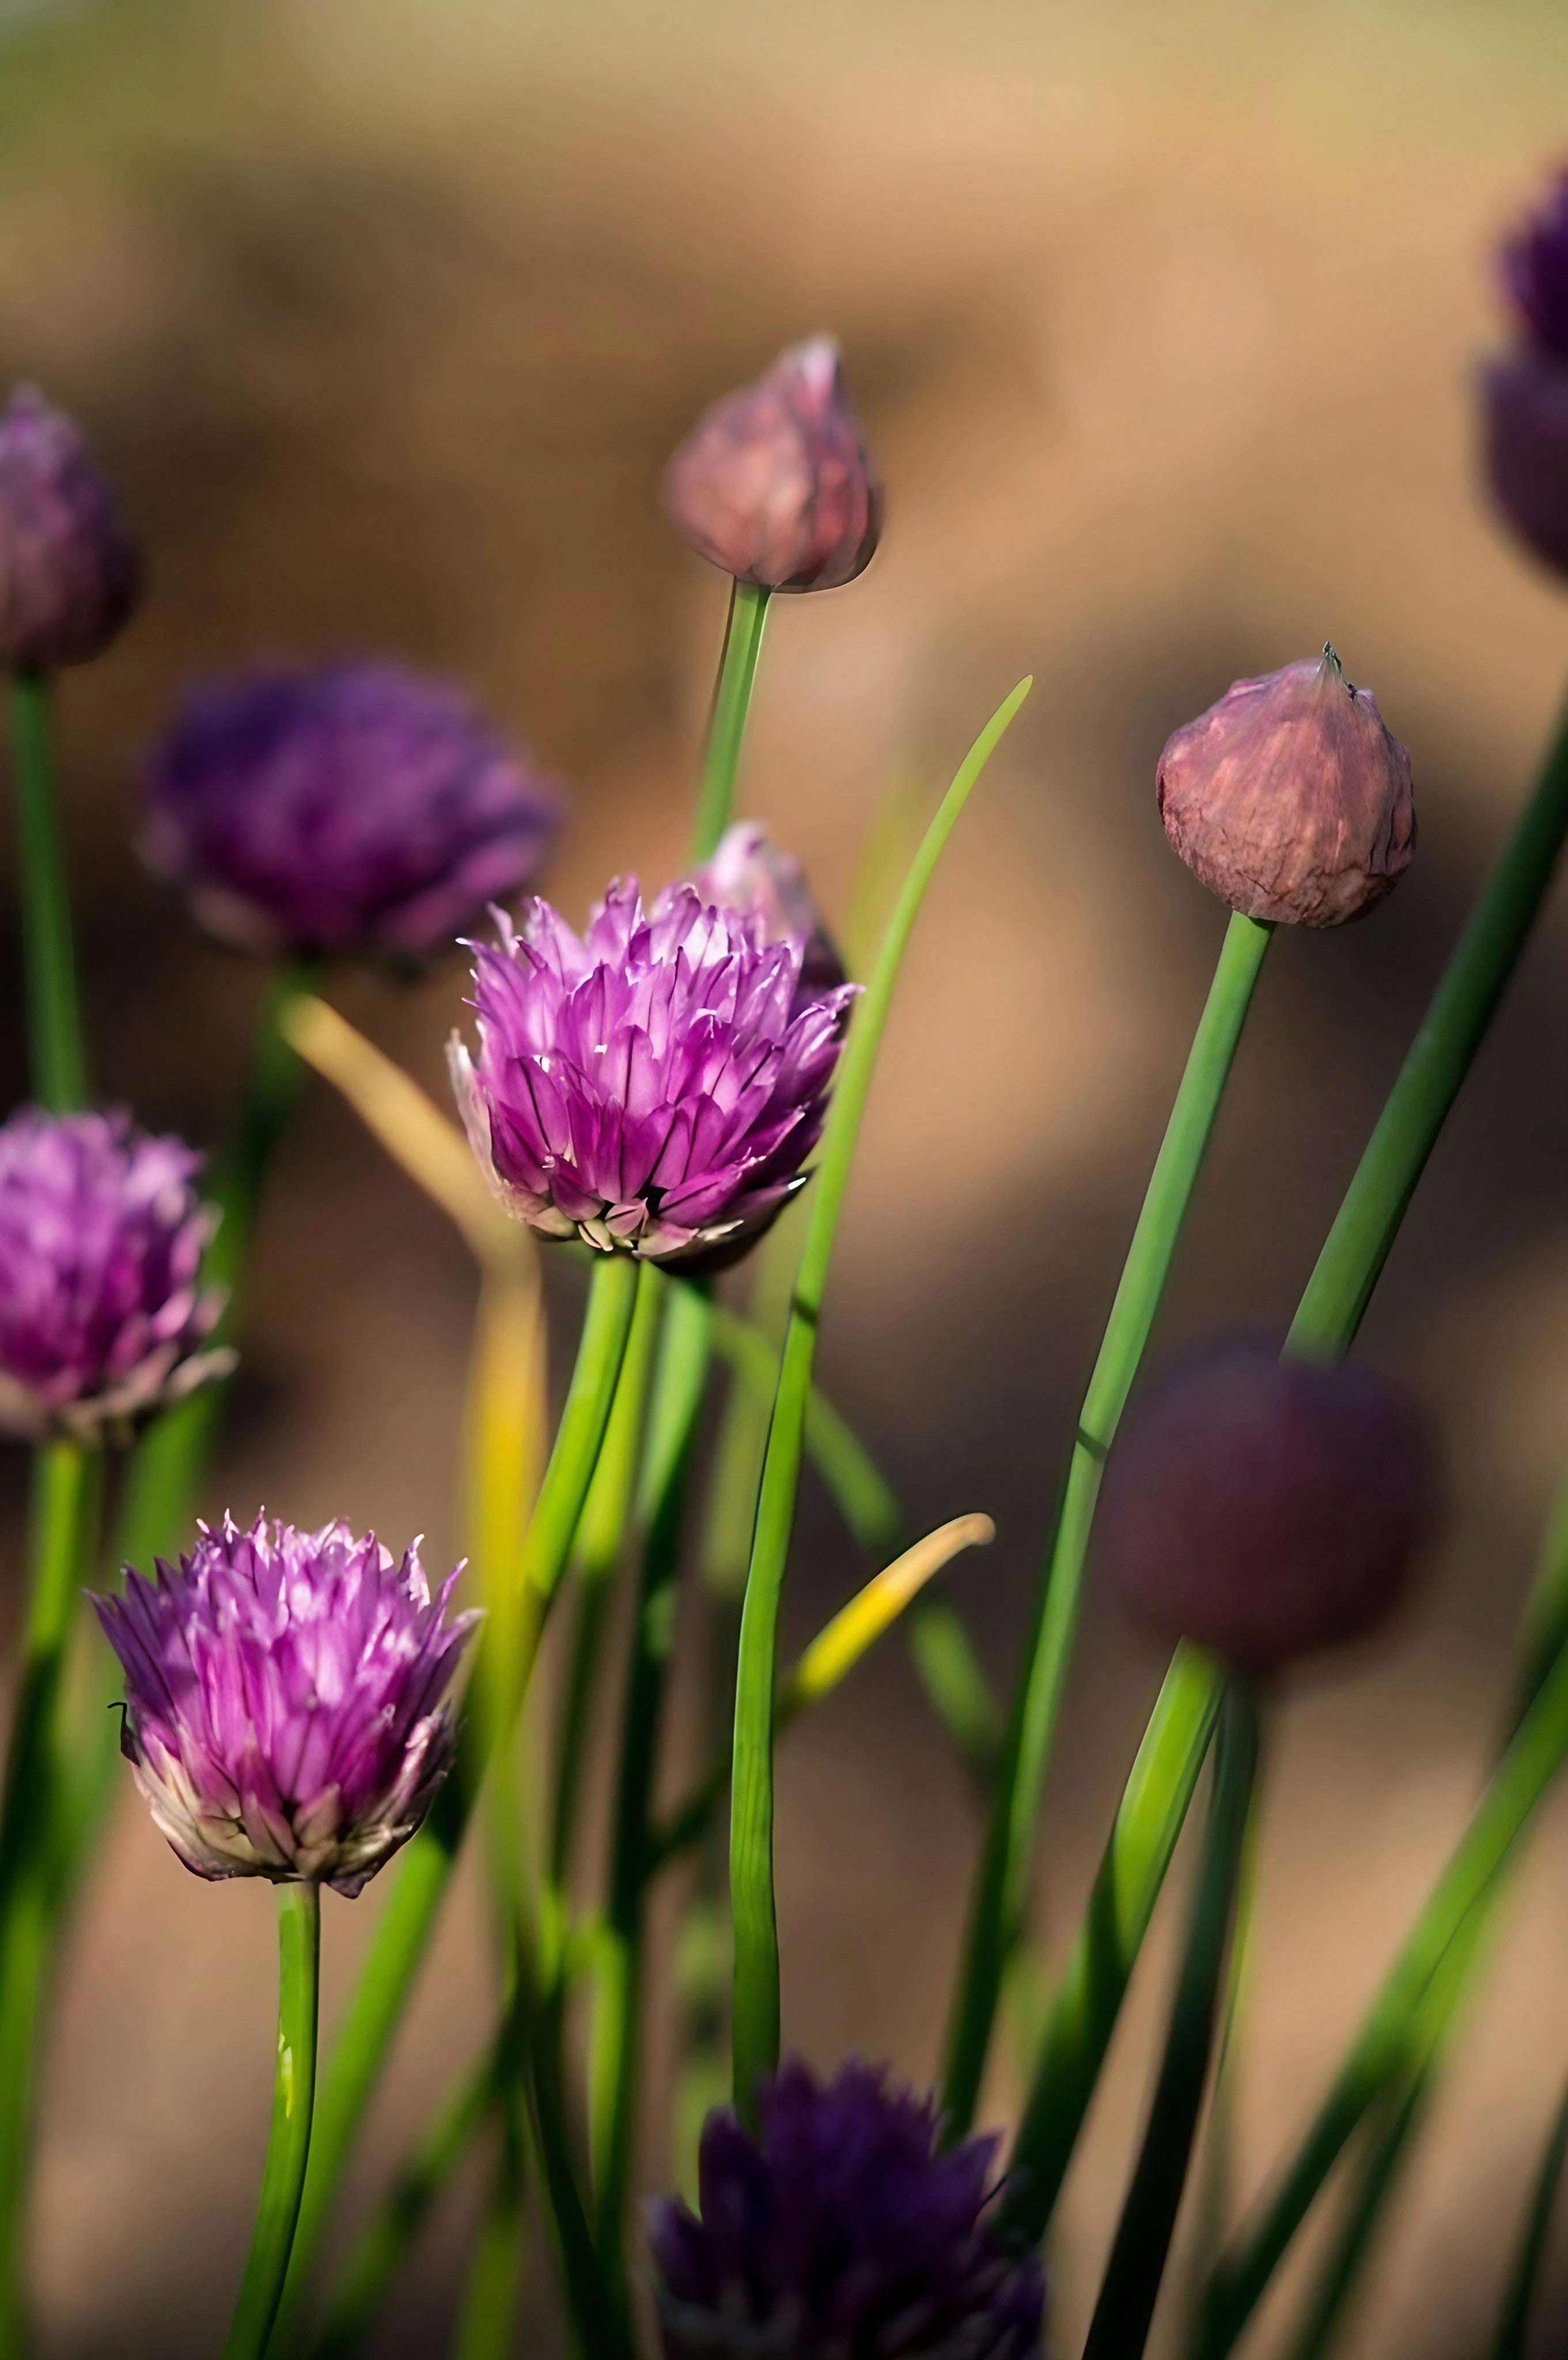 Fresh chives with purple blossoms in a garden setting